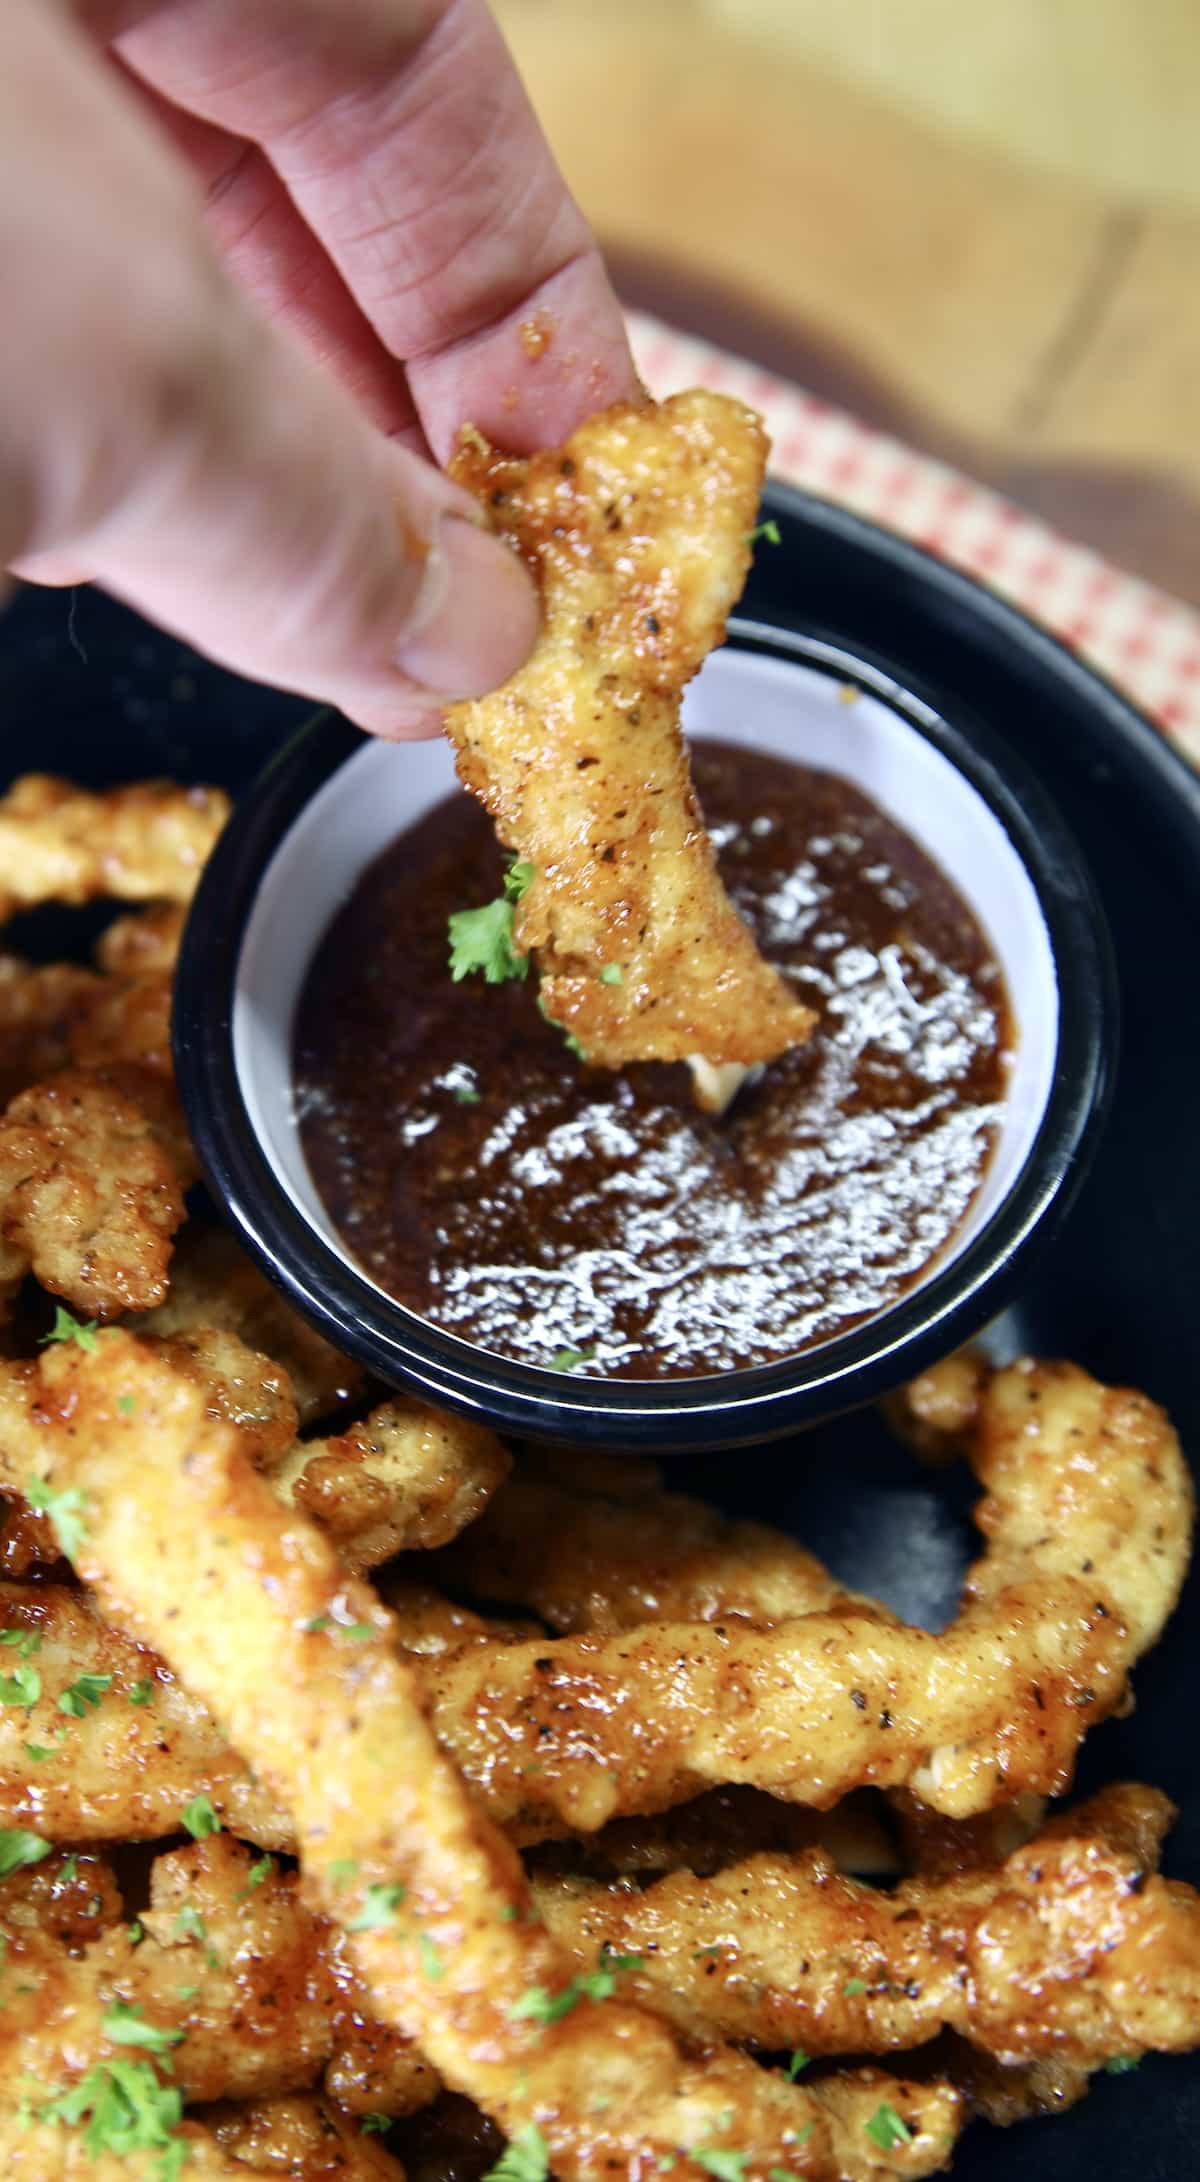 Chicken fries dipping in bbq sauce.